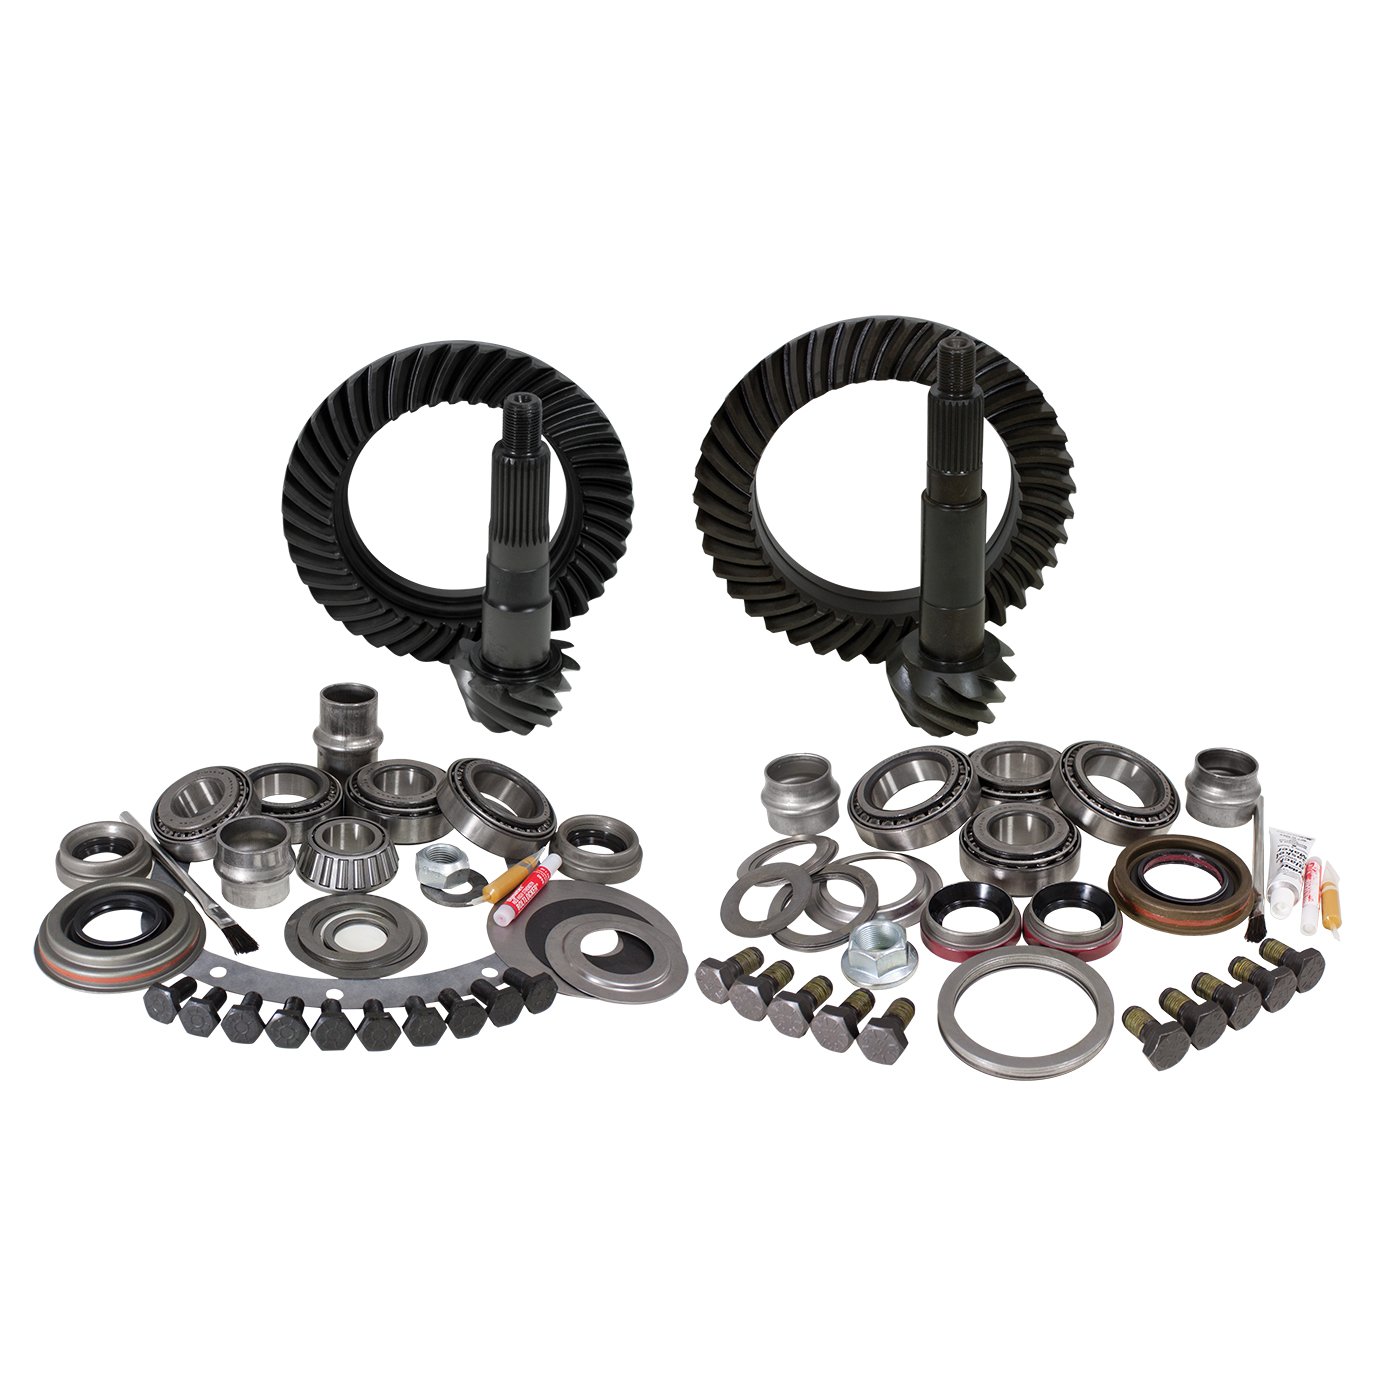 USA Standard ZGK012 Gear & Install Kit Package, For Non-Rubicon Jeep Jk, 4.56 Ratio